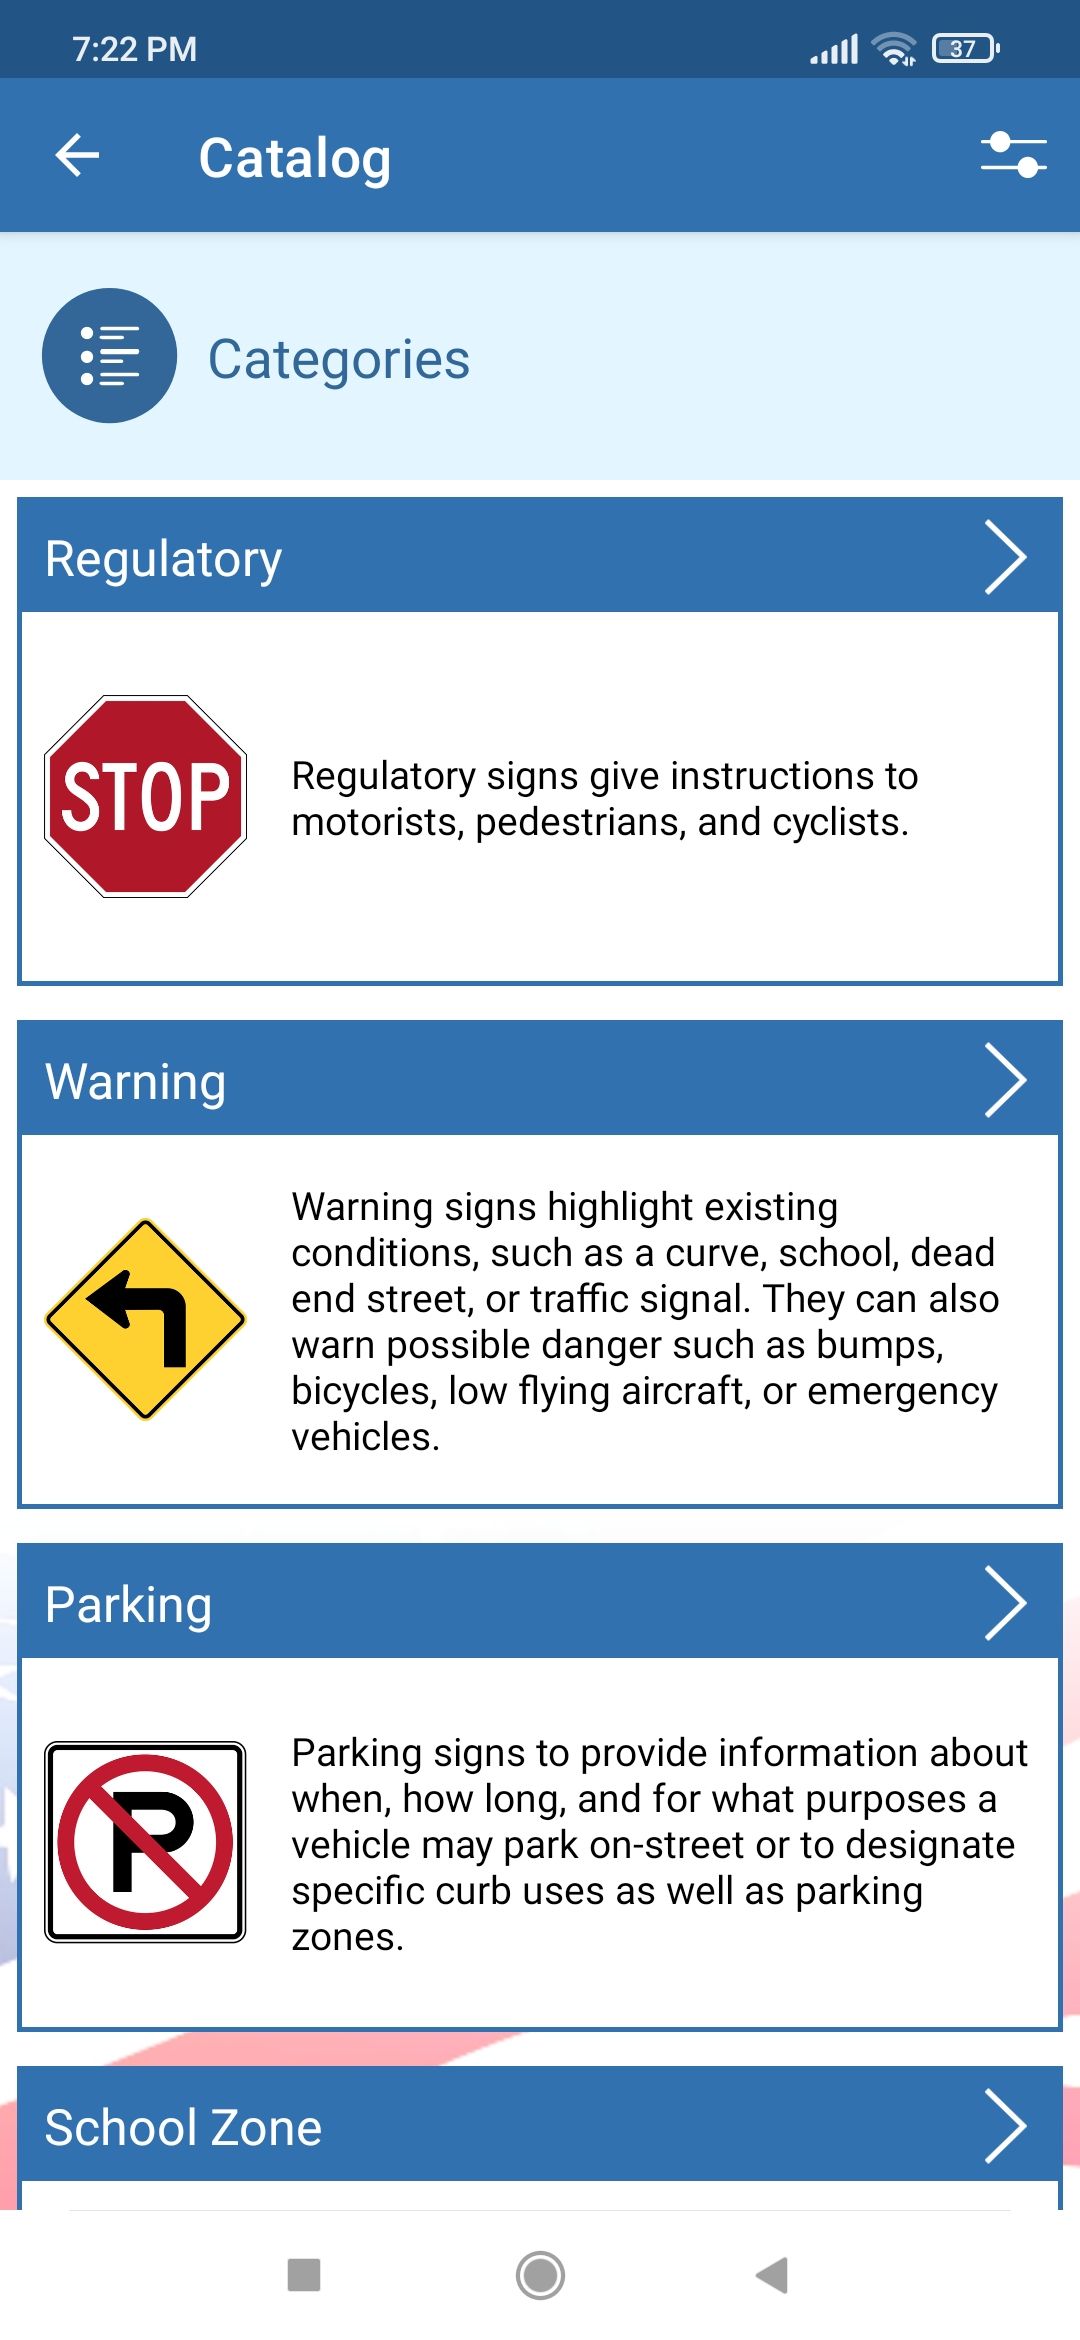 Road signs - US Traffic Rules app categories